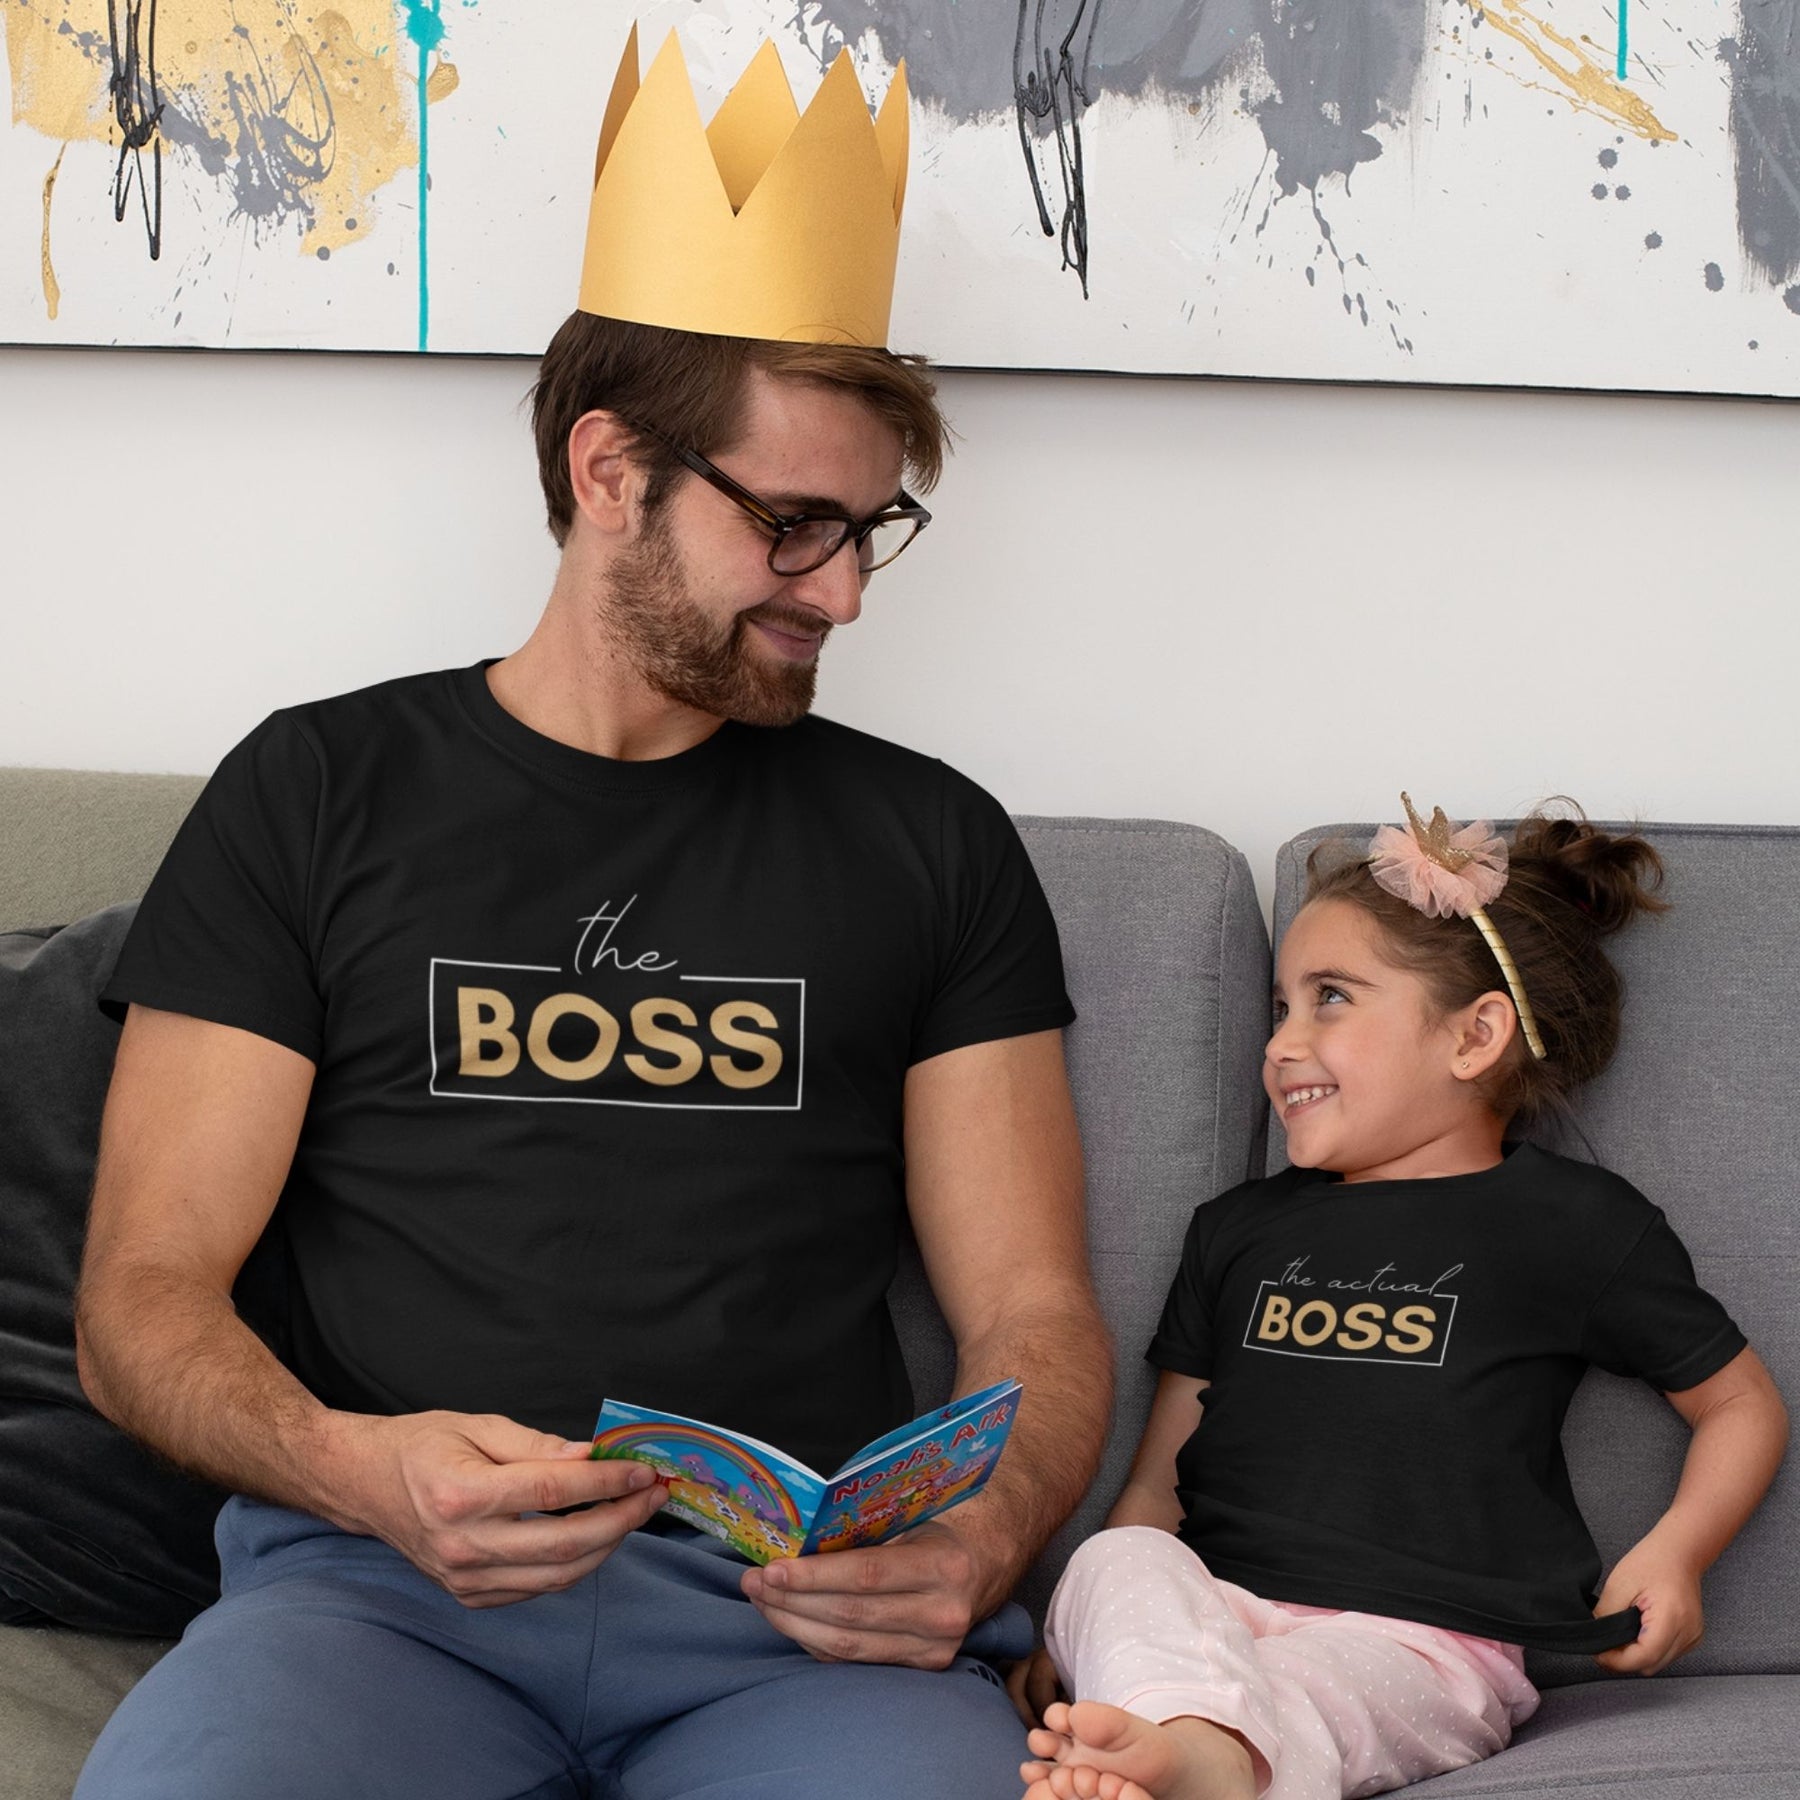 the-boss-matching-family-black-t-shirts-for-mom-dad-son-daughter-gogirgit-com